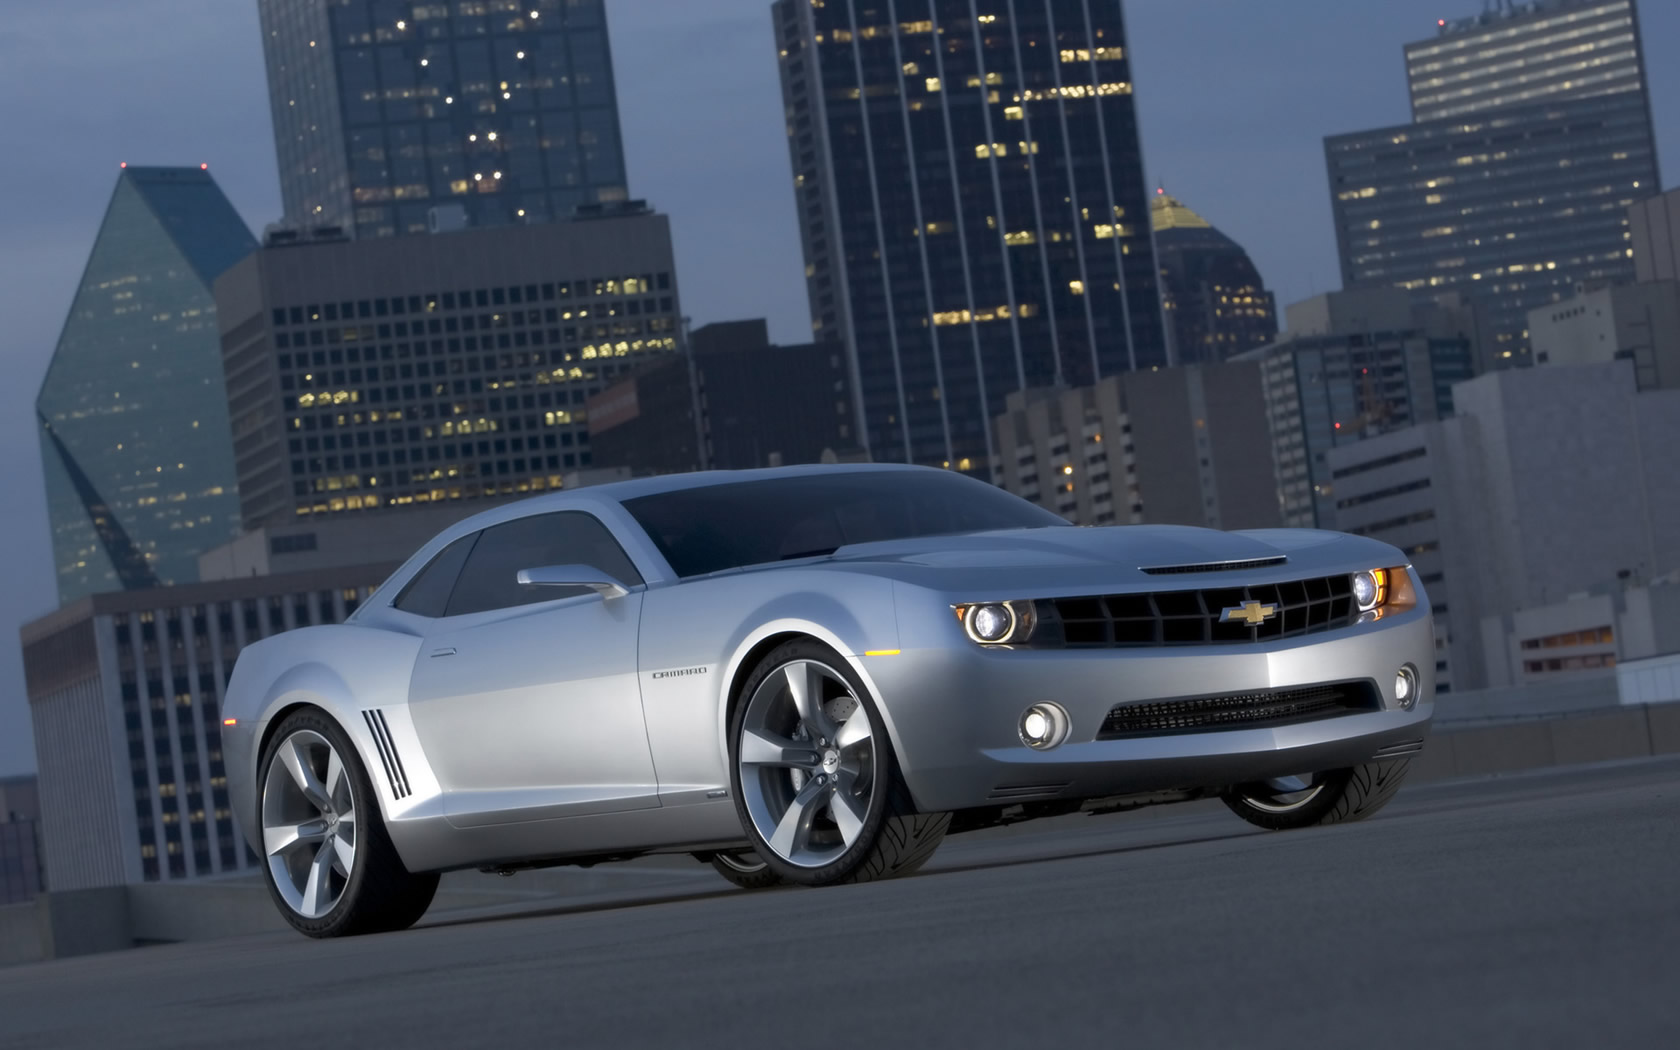 Download full size Chevrolet wallpaper / Cars / 1680x1050